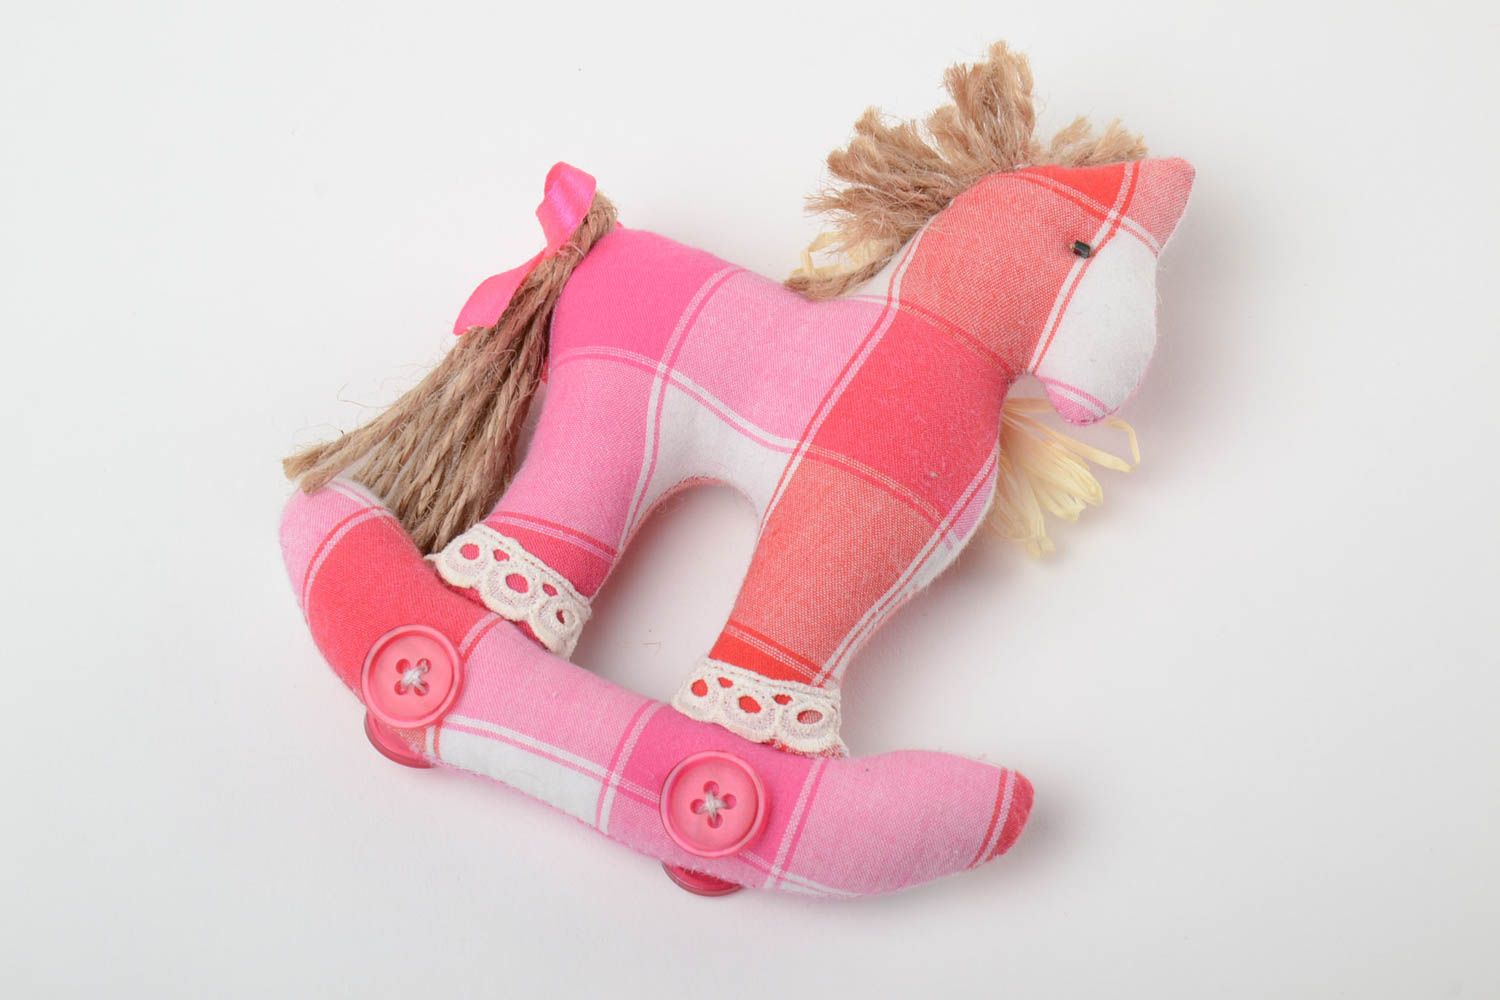 Beautiful handmade pink fabric soft toy horse for children and interior design photo 2